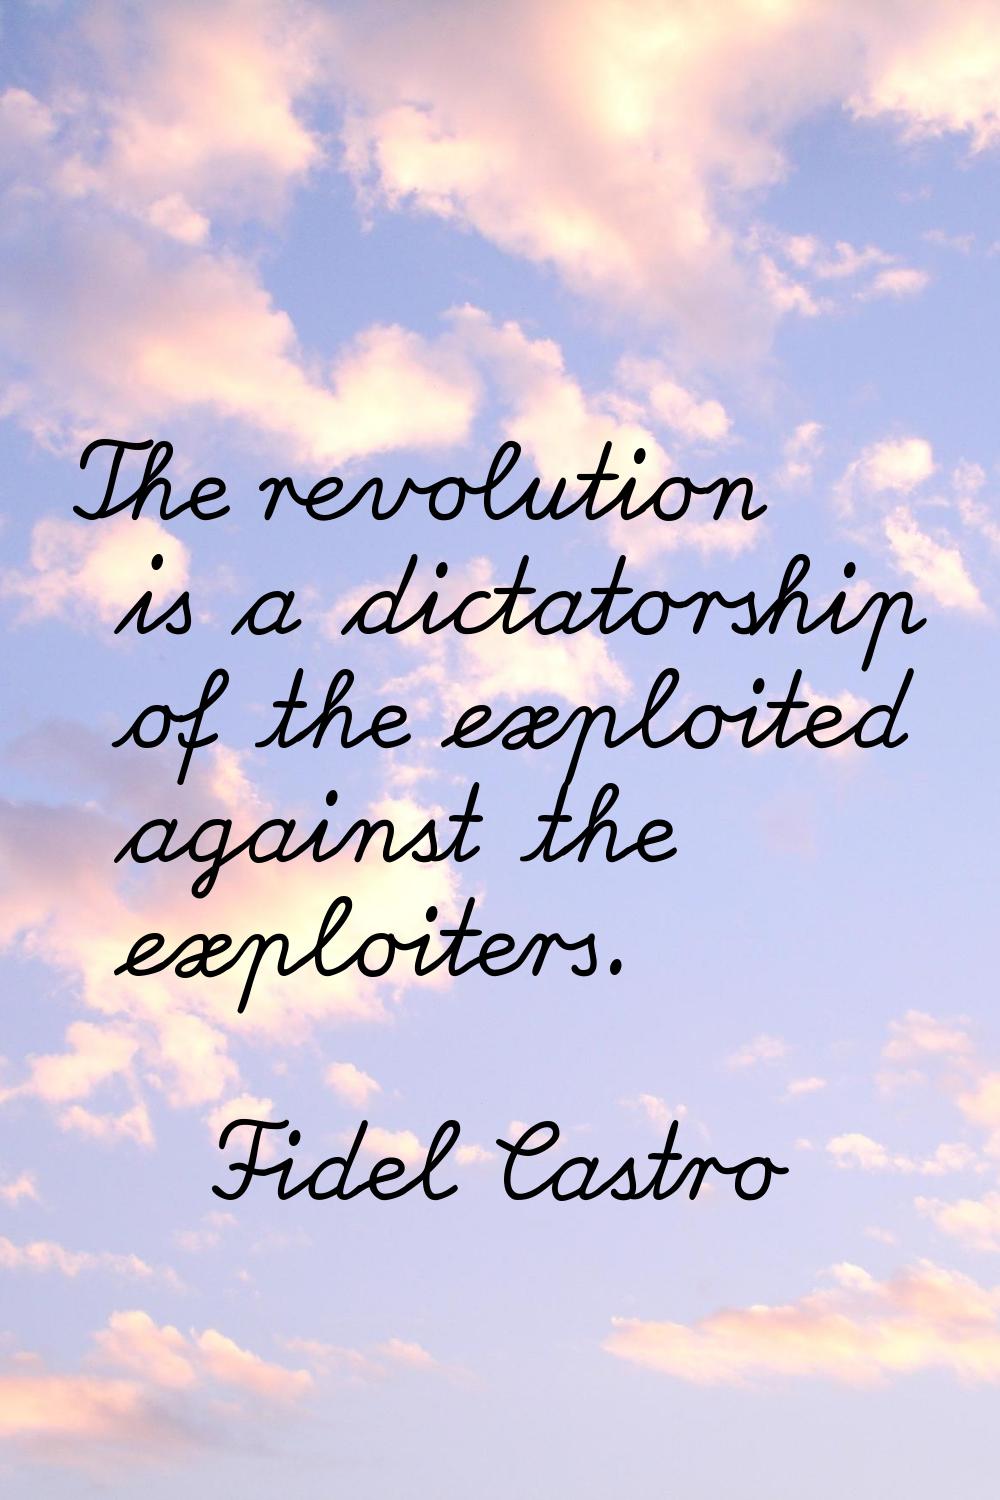 The revolution is a dictatorship of the exploited against the exploiters.